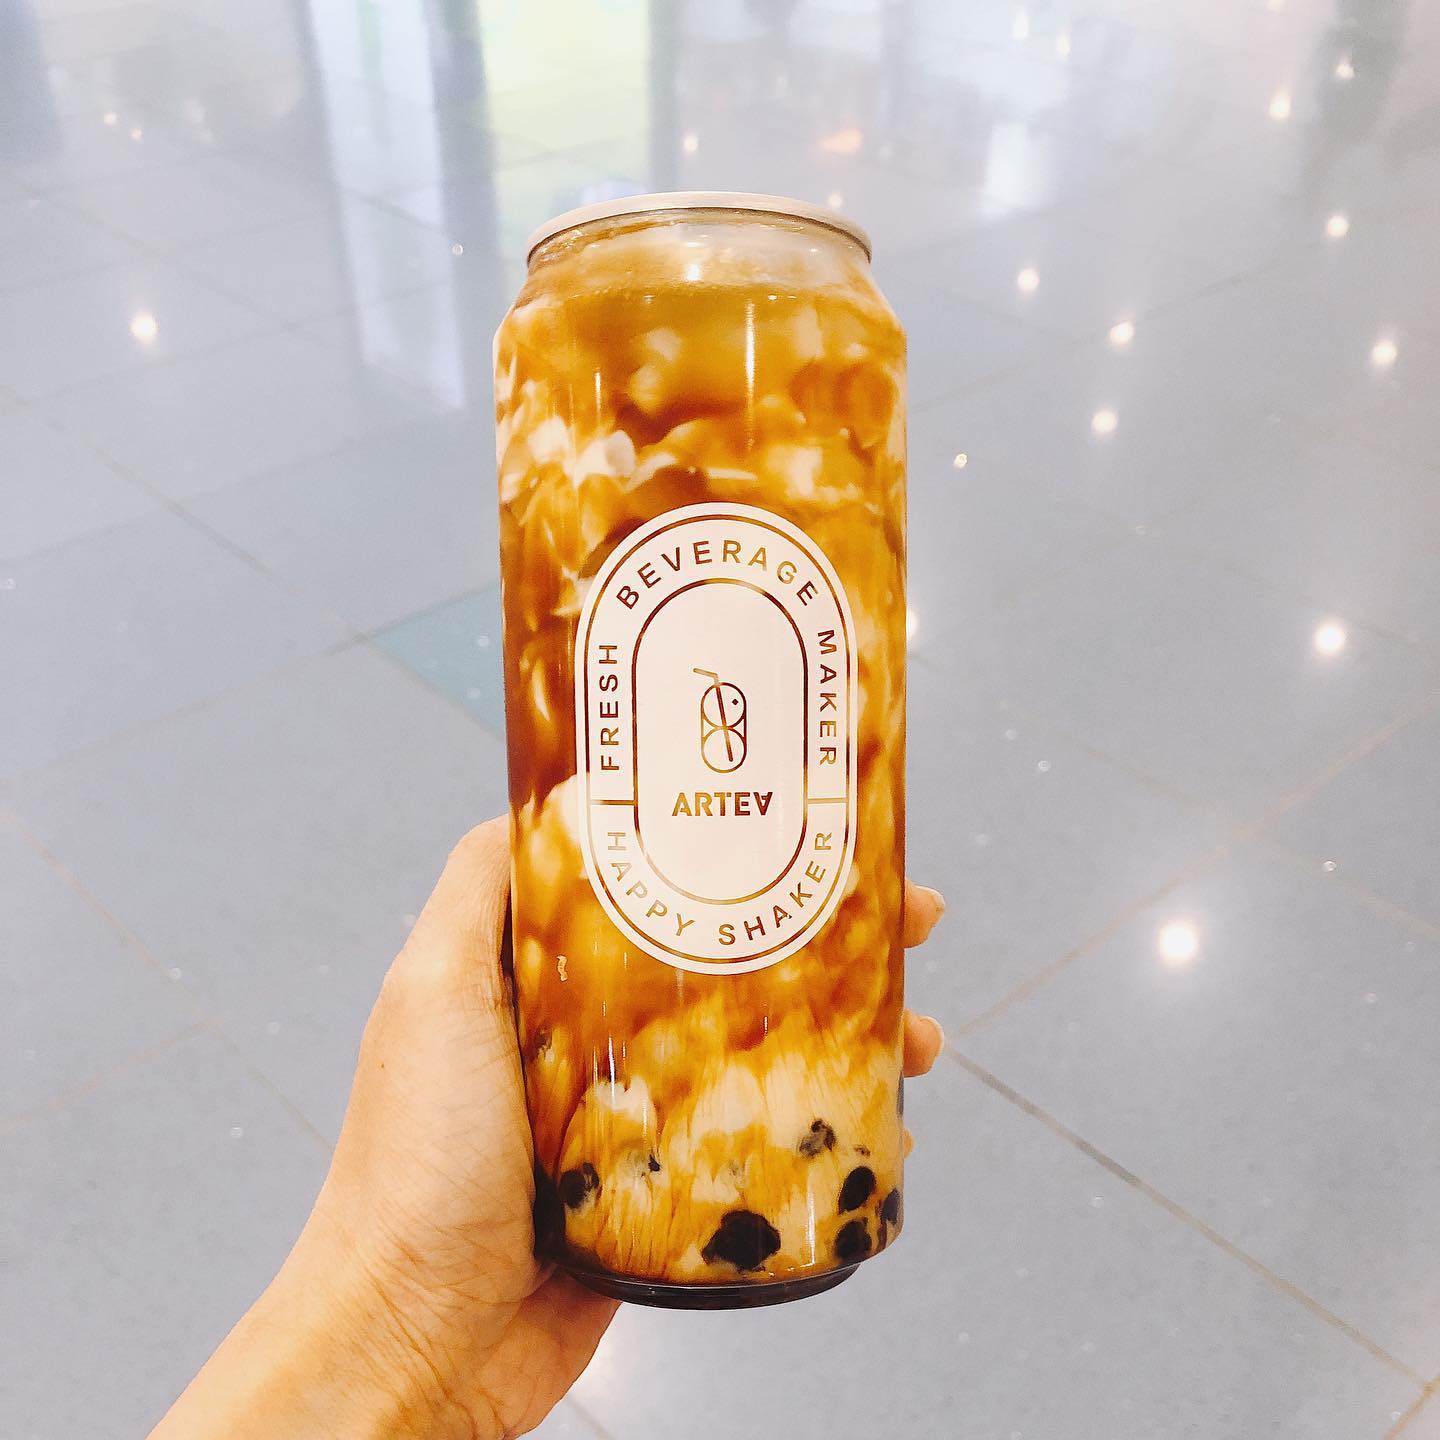 This cafe in Singapore sells Brown Sugar Bubble Milk in a can for $5.20 - 5